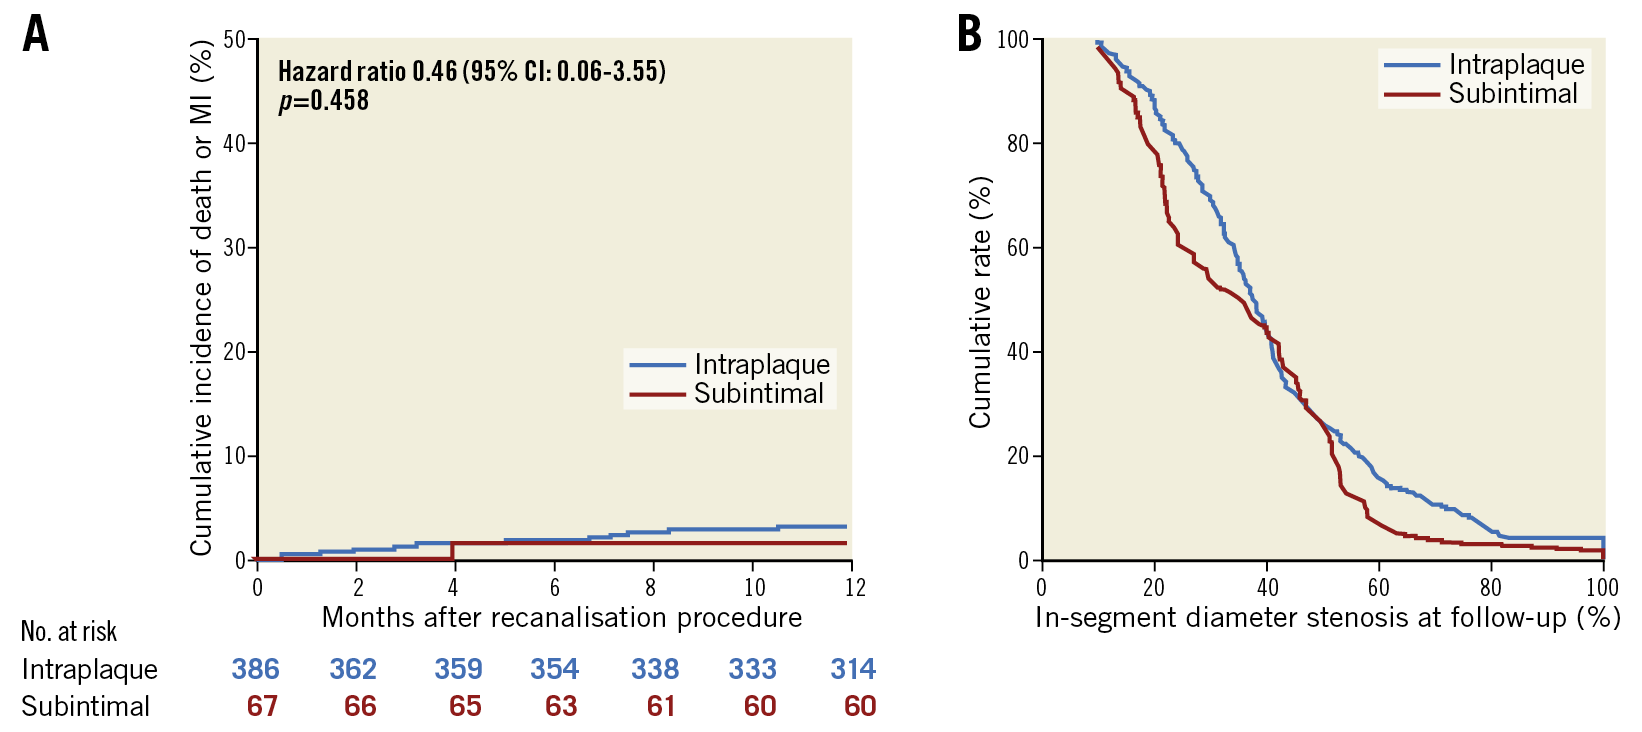 Central illustration. Clinical and angiographic outcomes according to CTO recanalisation technique. A) Cumulative incidence of all-cause death or myocardial infarction at 12-month follow-up according to recanalisation technique. B) Cumulative frequency distribution curves for in-segment percent diameter stenosis at angiographic follow-up according to recanalisation technique.